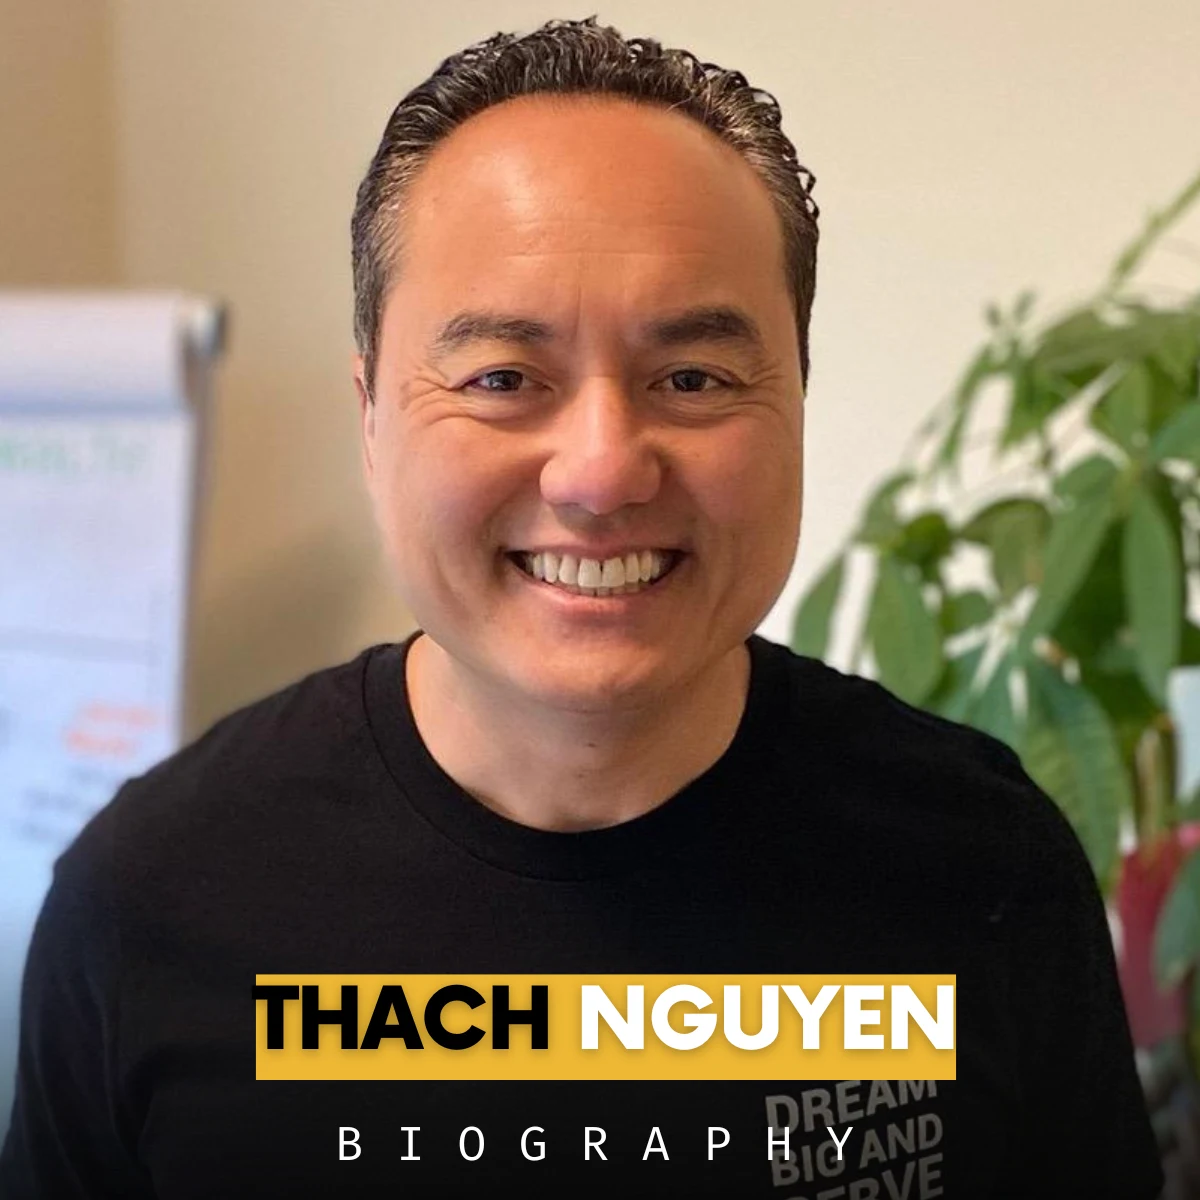 Thach Nguyen biography